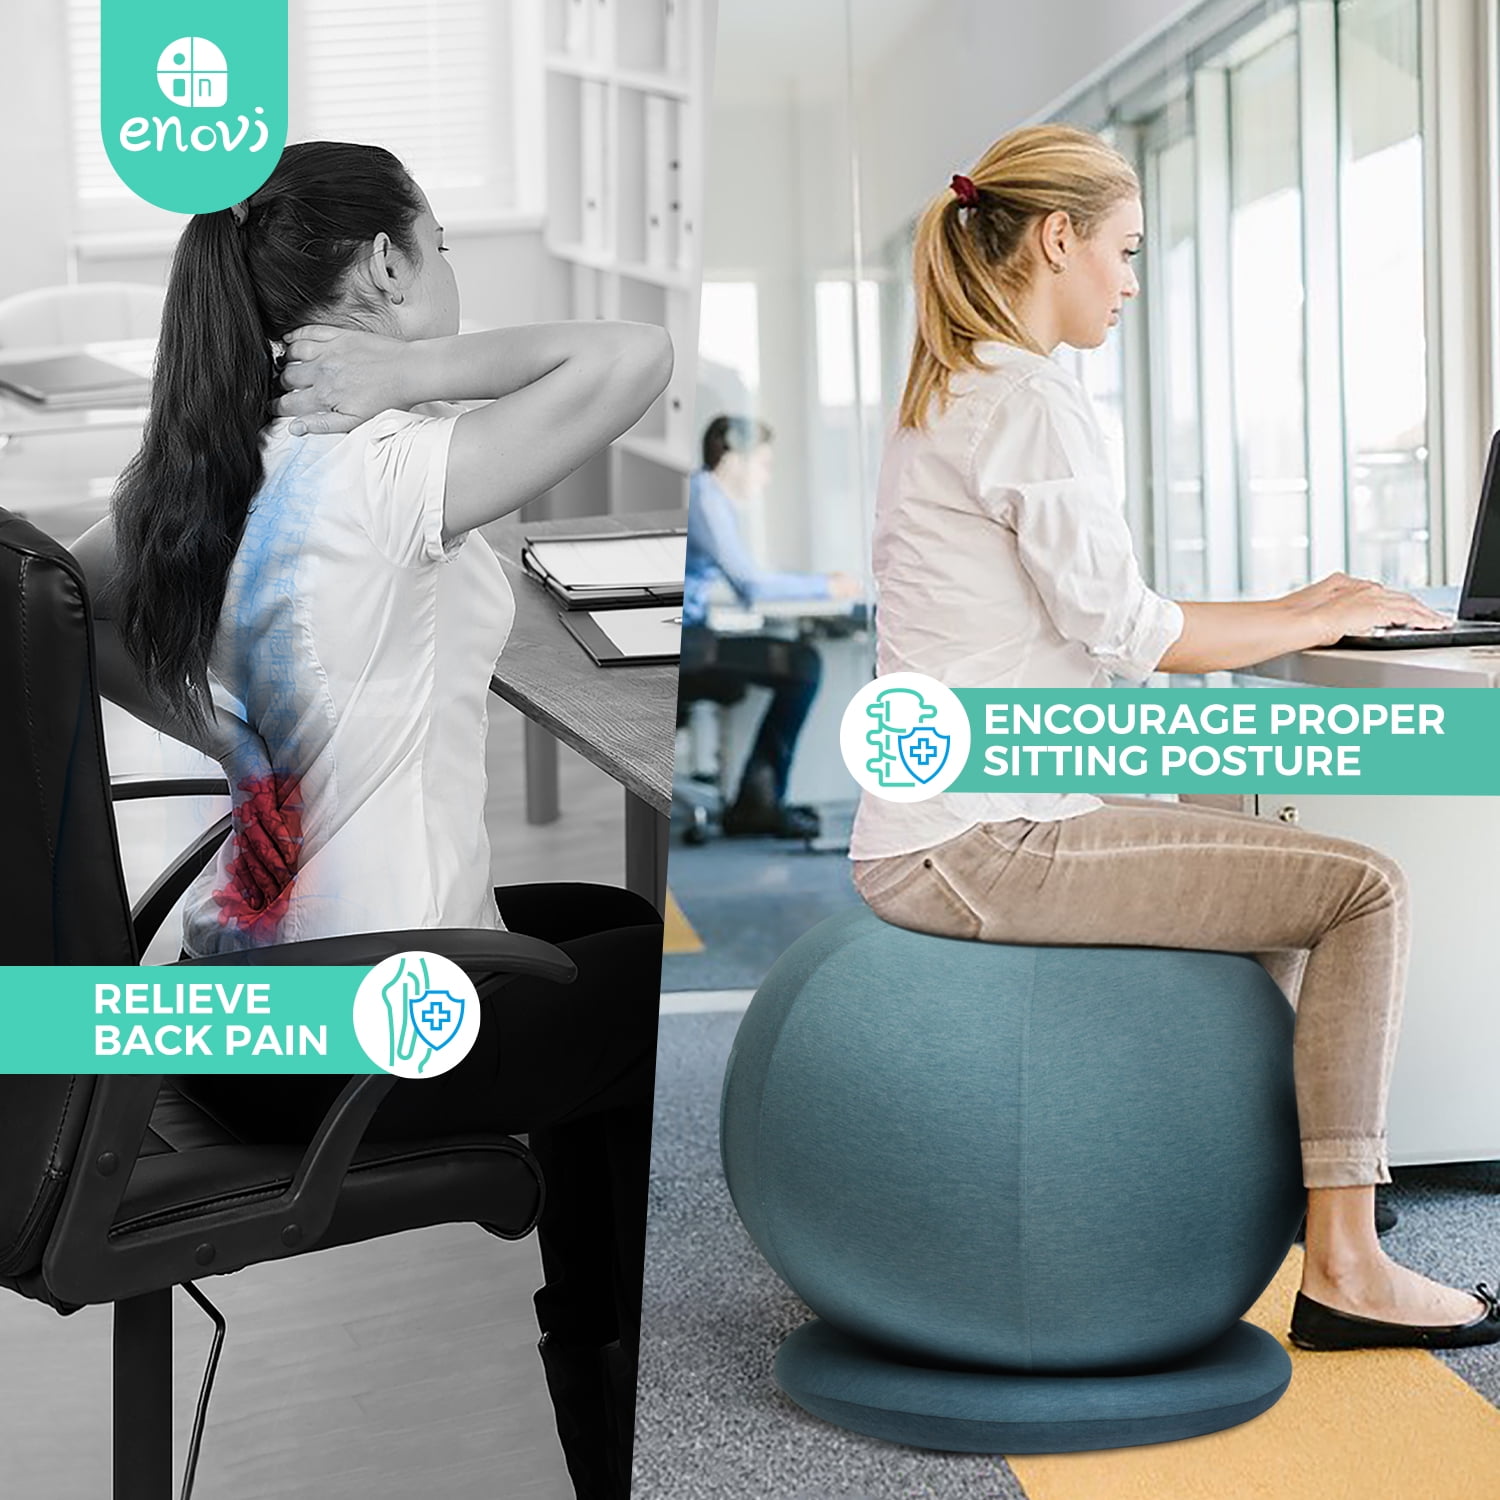 Enovi Lite Ball Chair, Yoga Ball Exercise Ball with Slipcover for Home Office Desk, Stability Ball & Balance Ball Seat to Relieve Back Pain, 65cm, FG